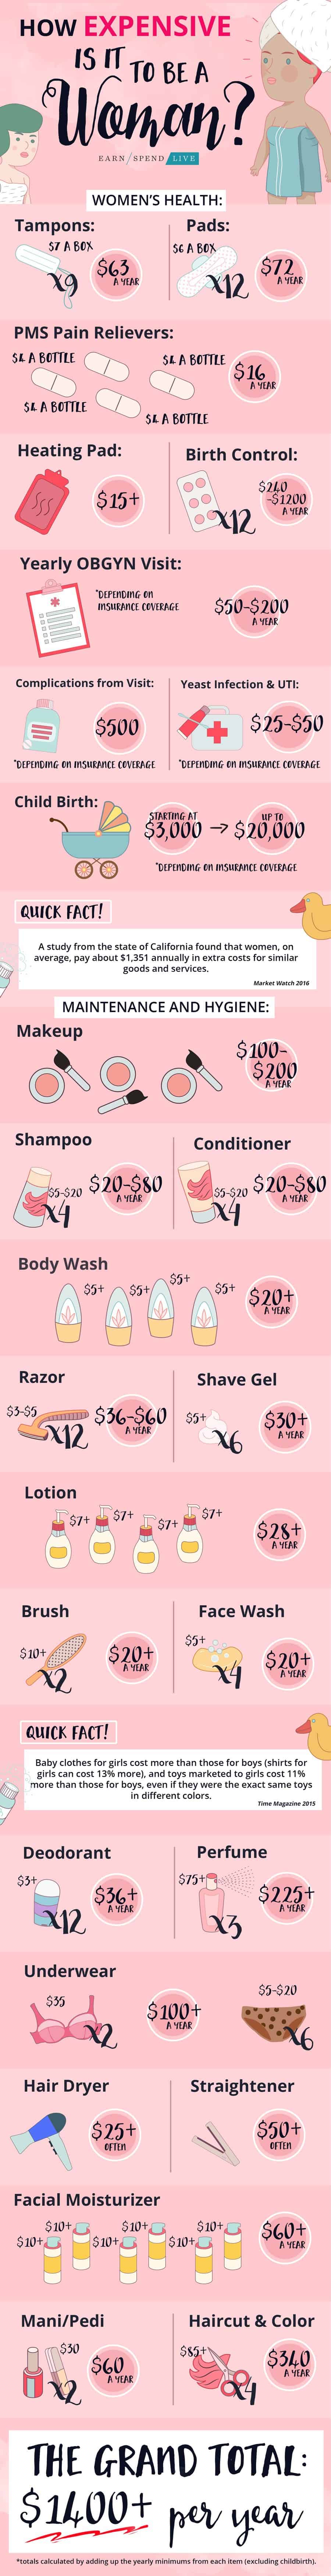 The Pink Tax: How Expensive is it to Be a Woman?